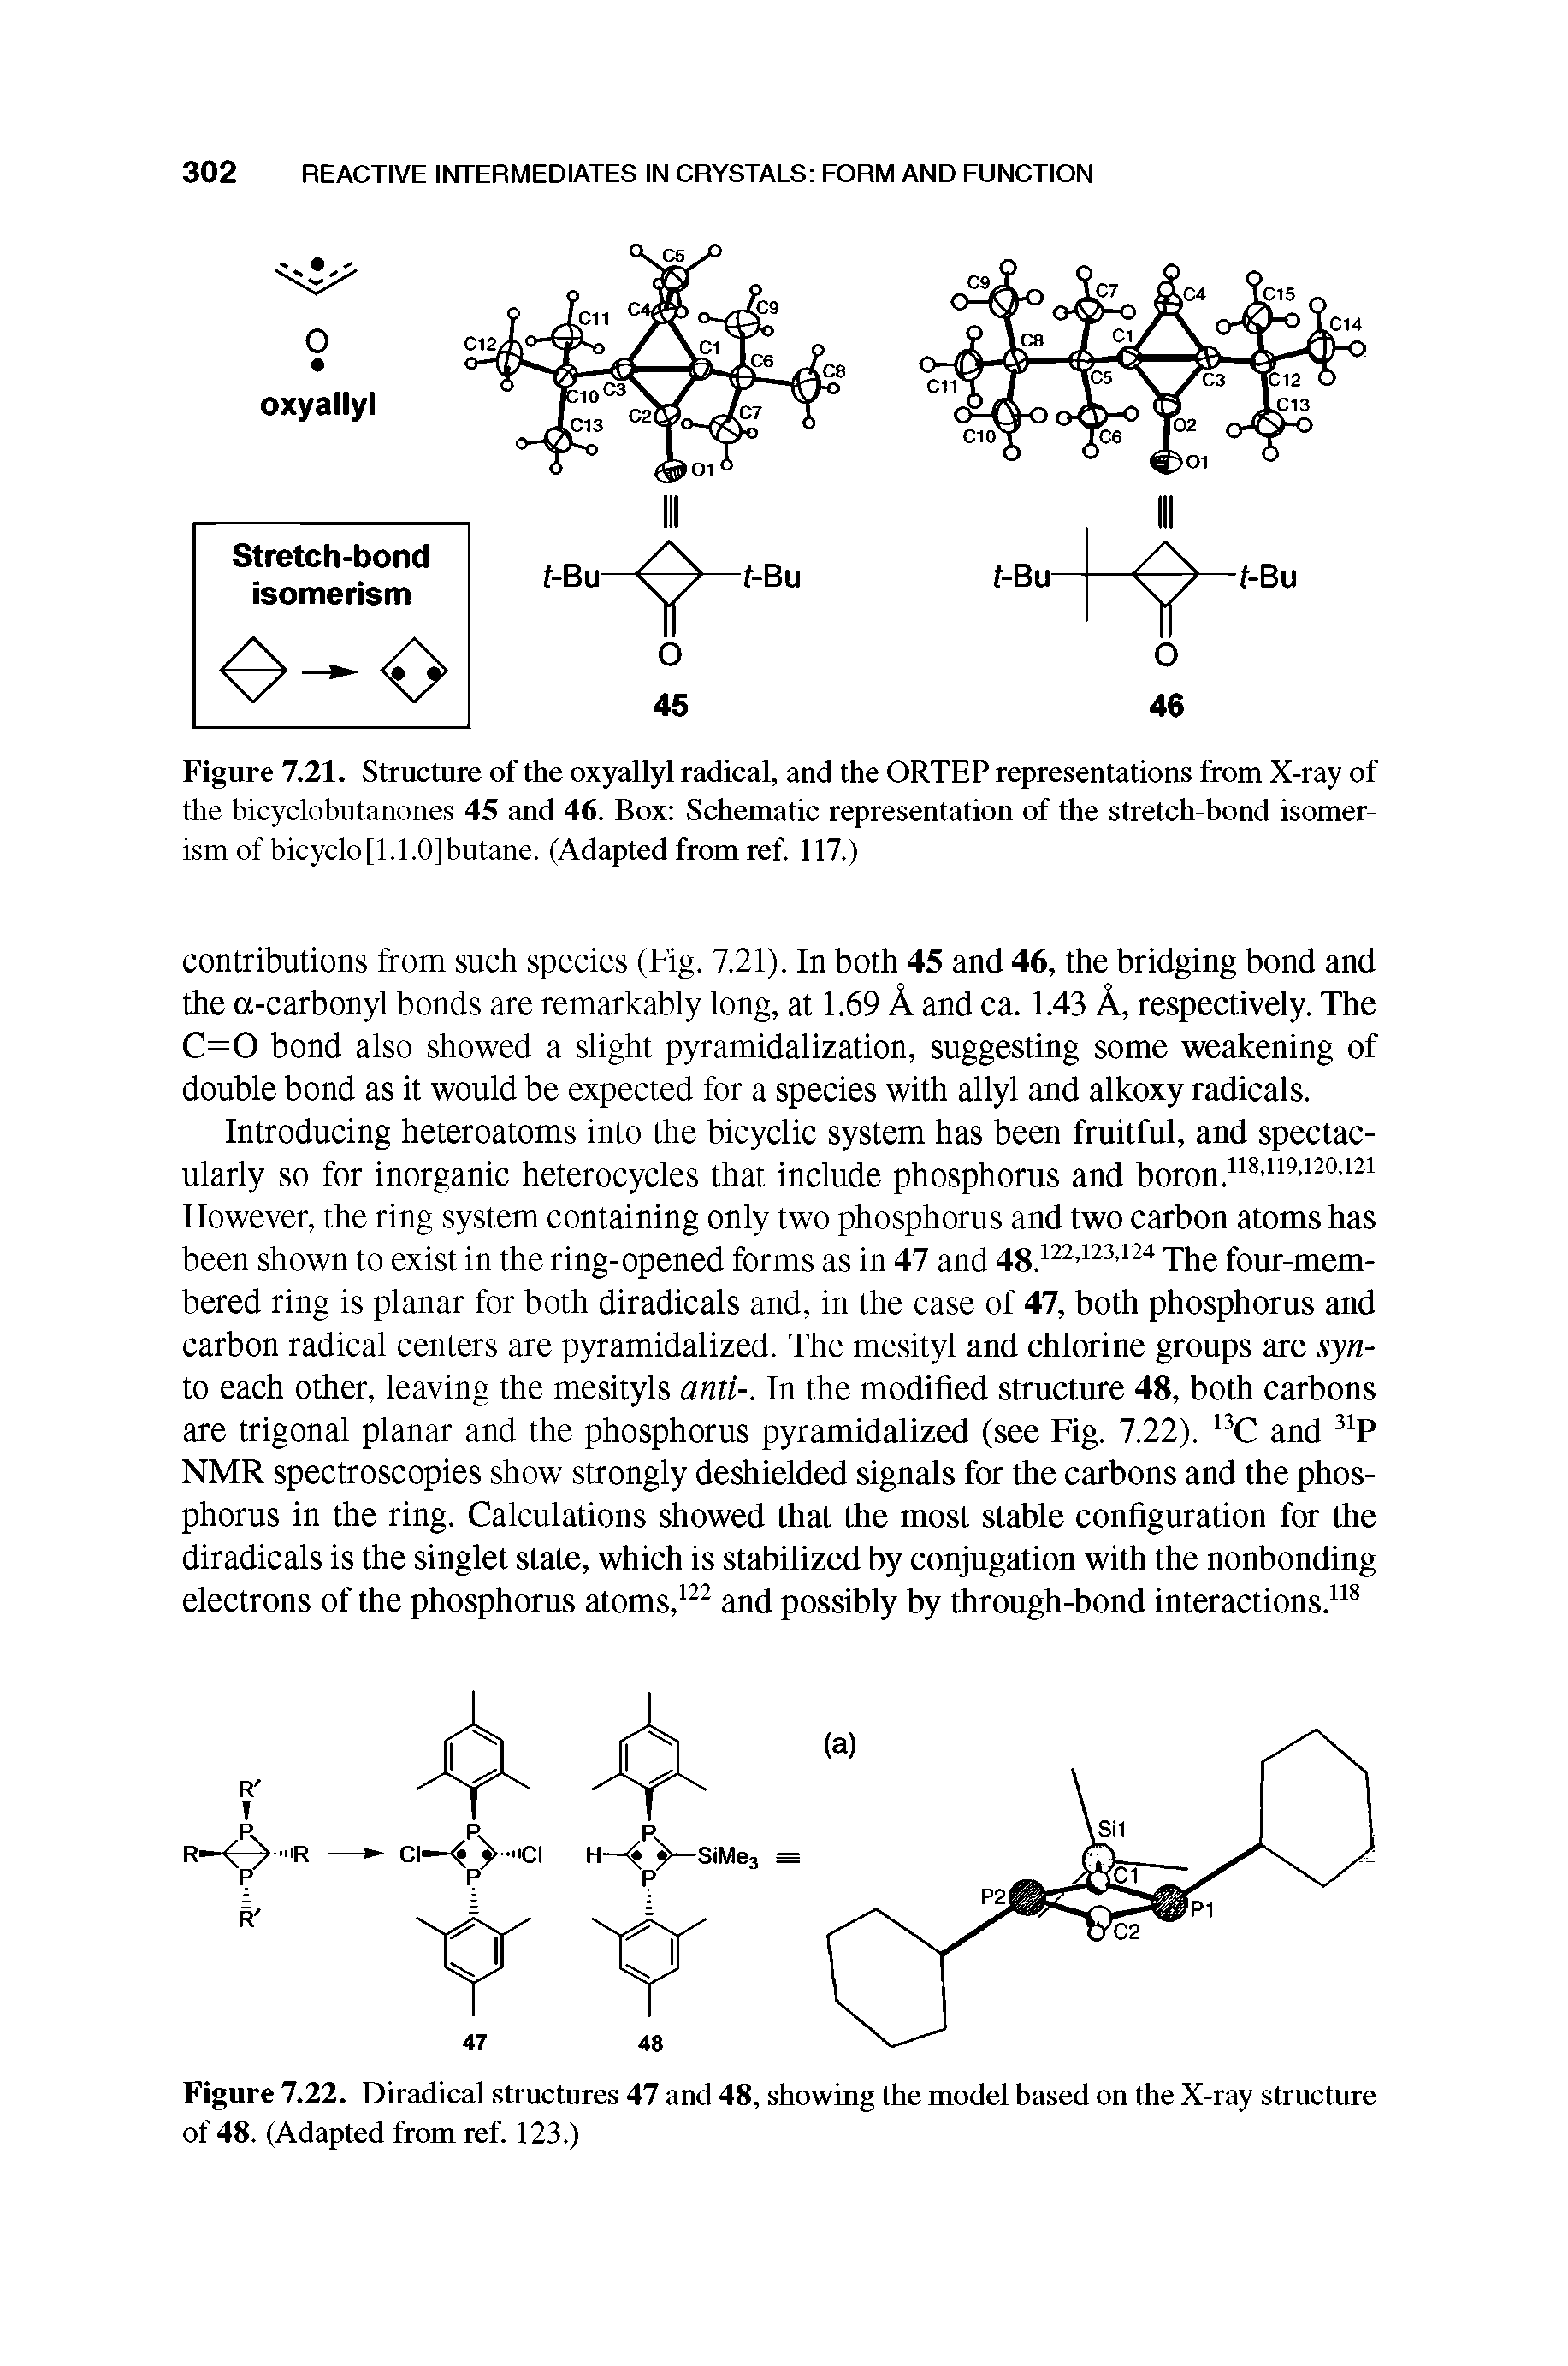 Figure 7.21. Structure of the oxyallyl radical, and the ORTEP representations from X-ray of the bicyclobutanones 45 and 46. Box Schematic representation of the stretch-hond isomerism of bicyclo[1.1.0]butane. (Adapted from ref. 117.)...